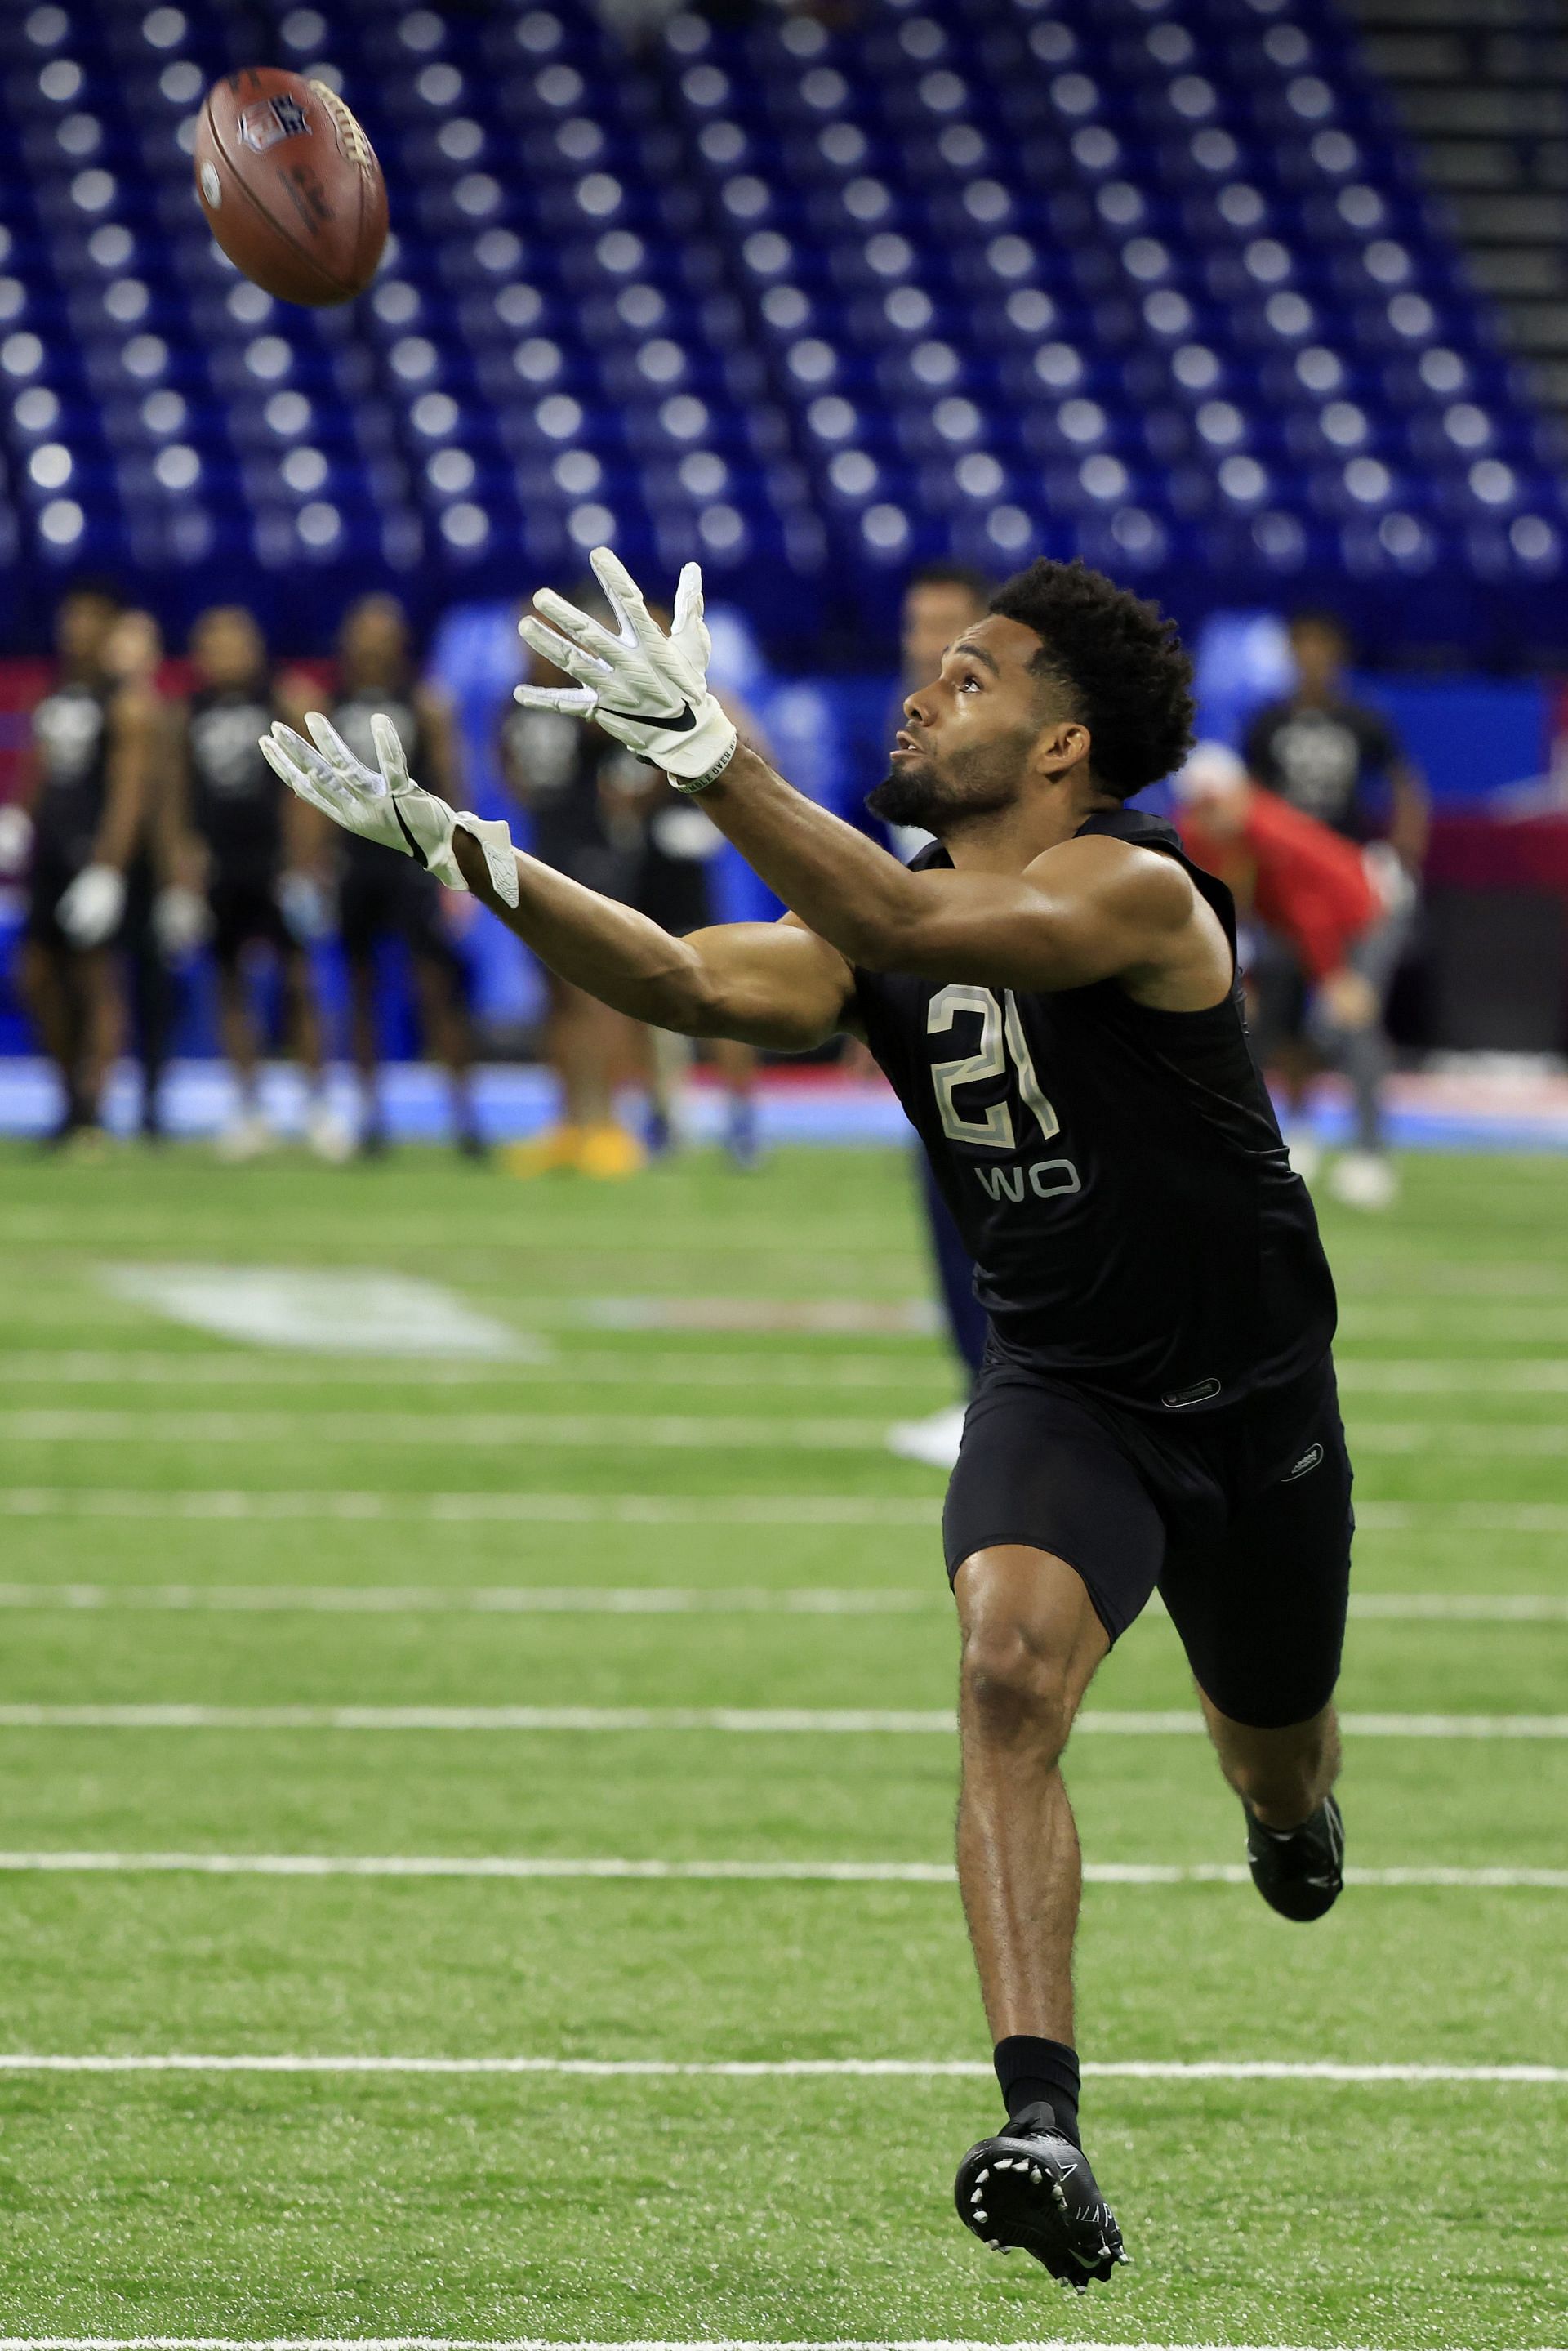 Chris Olave at the NFL Combine